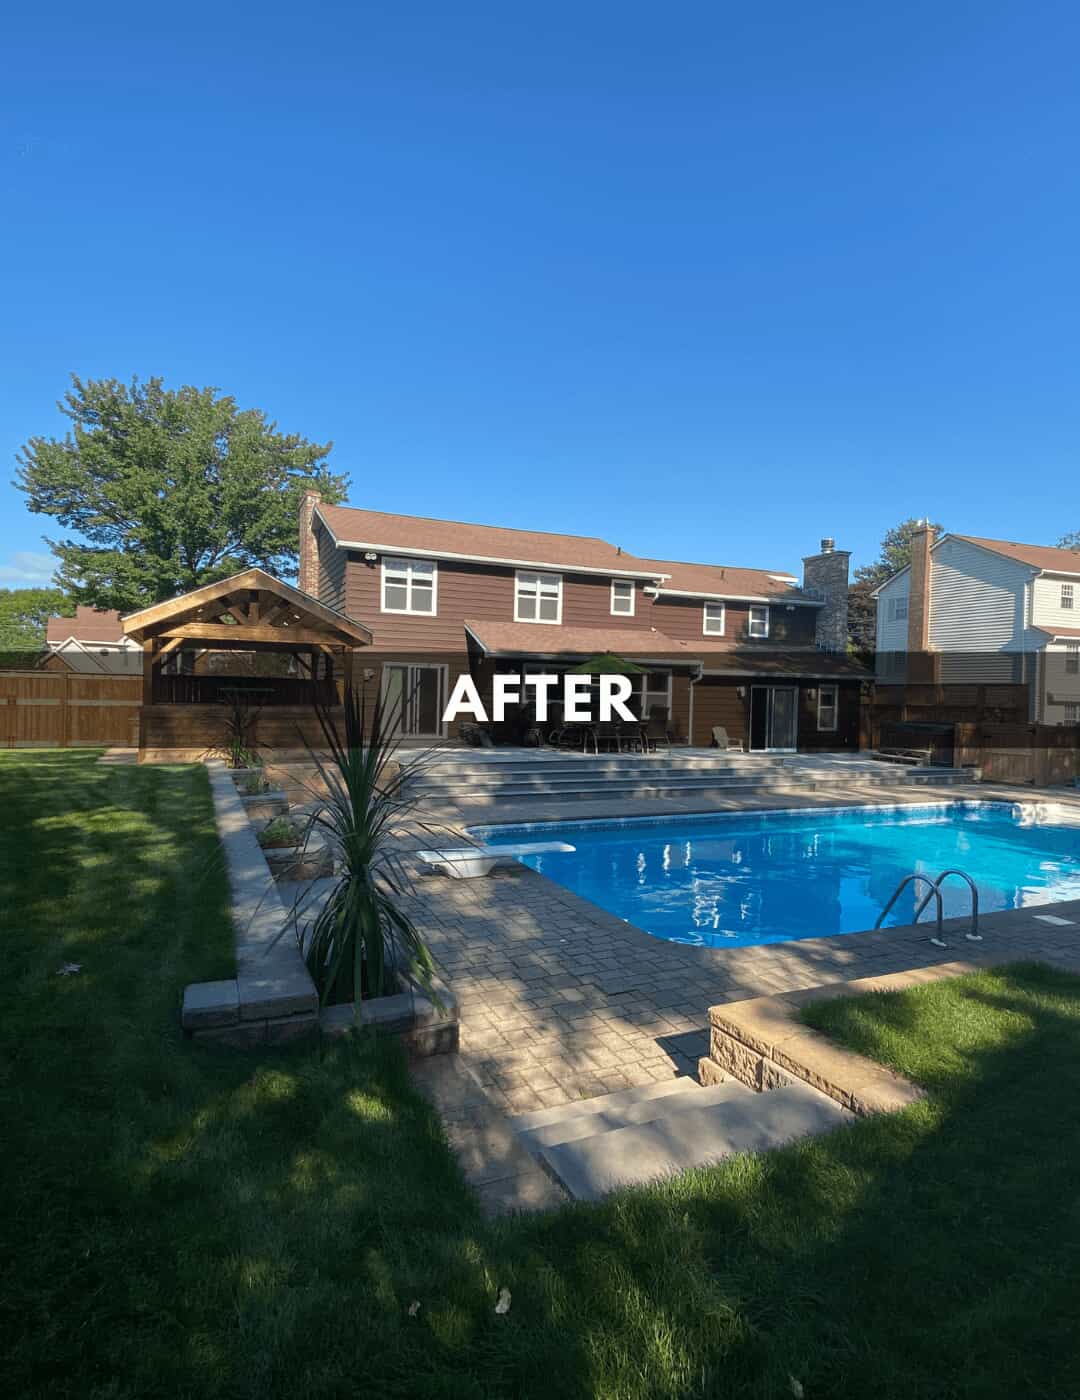 After photo of backyard with pool, deck, patio, outdoor kitchen, and lawn area